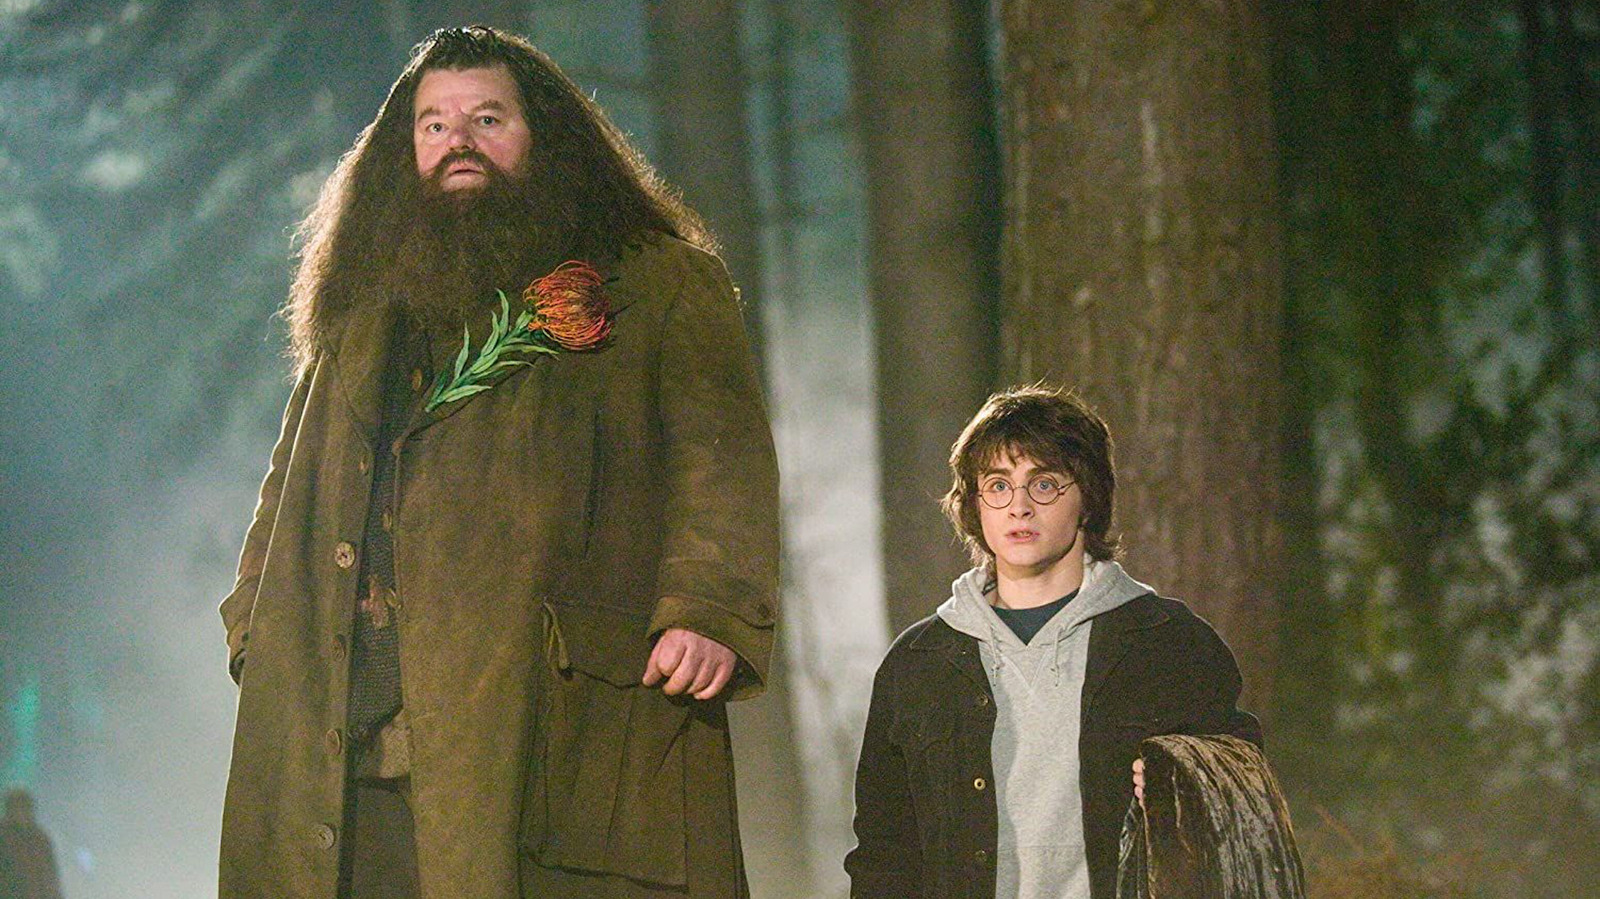 Who is the Giant Hagrid befriends? 2